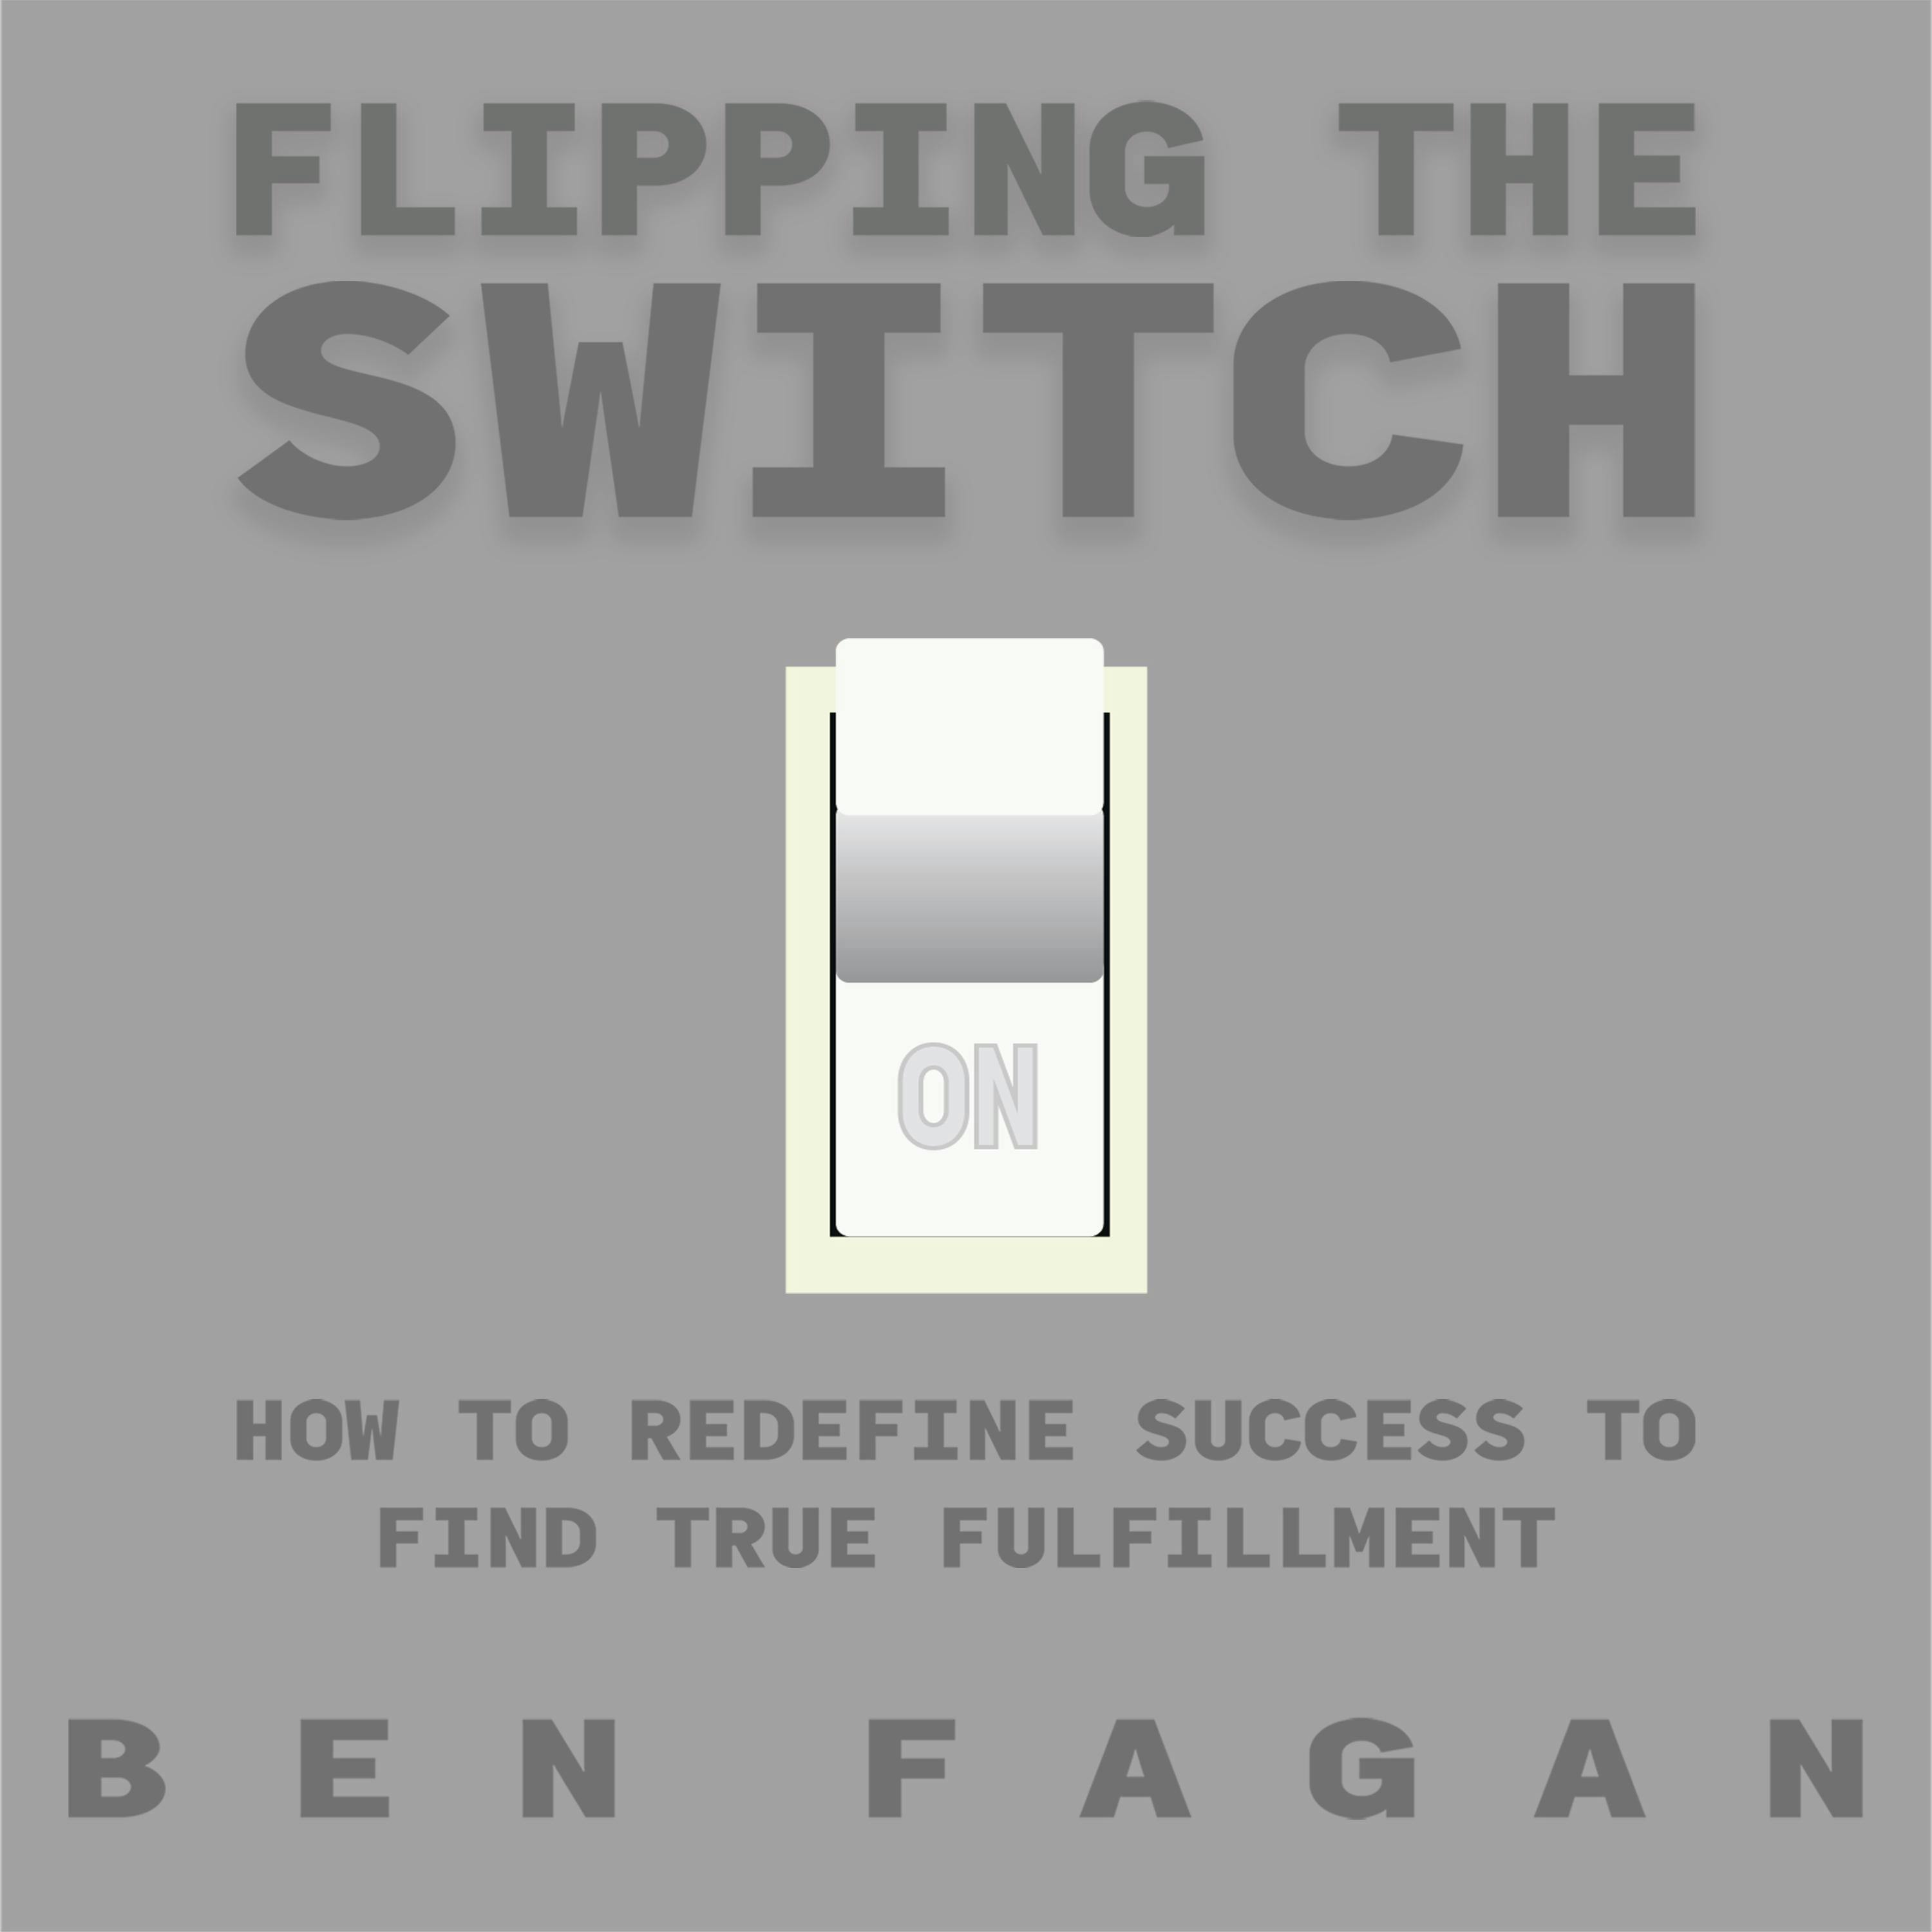 Flipping The Switch: How to Redefine Success to Find True Fulfillment - Ben Fagan